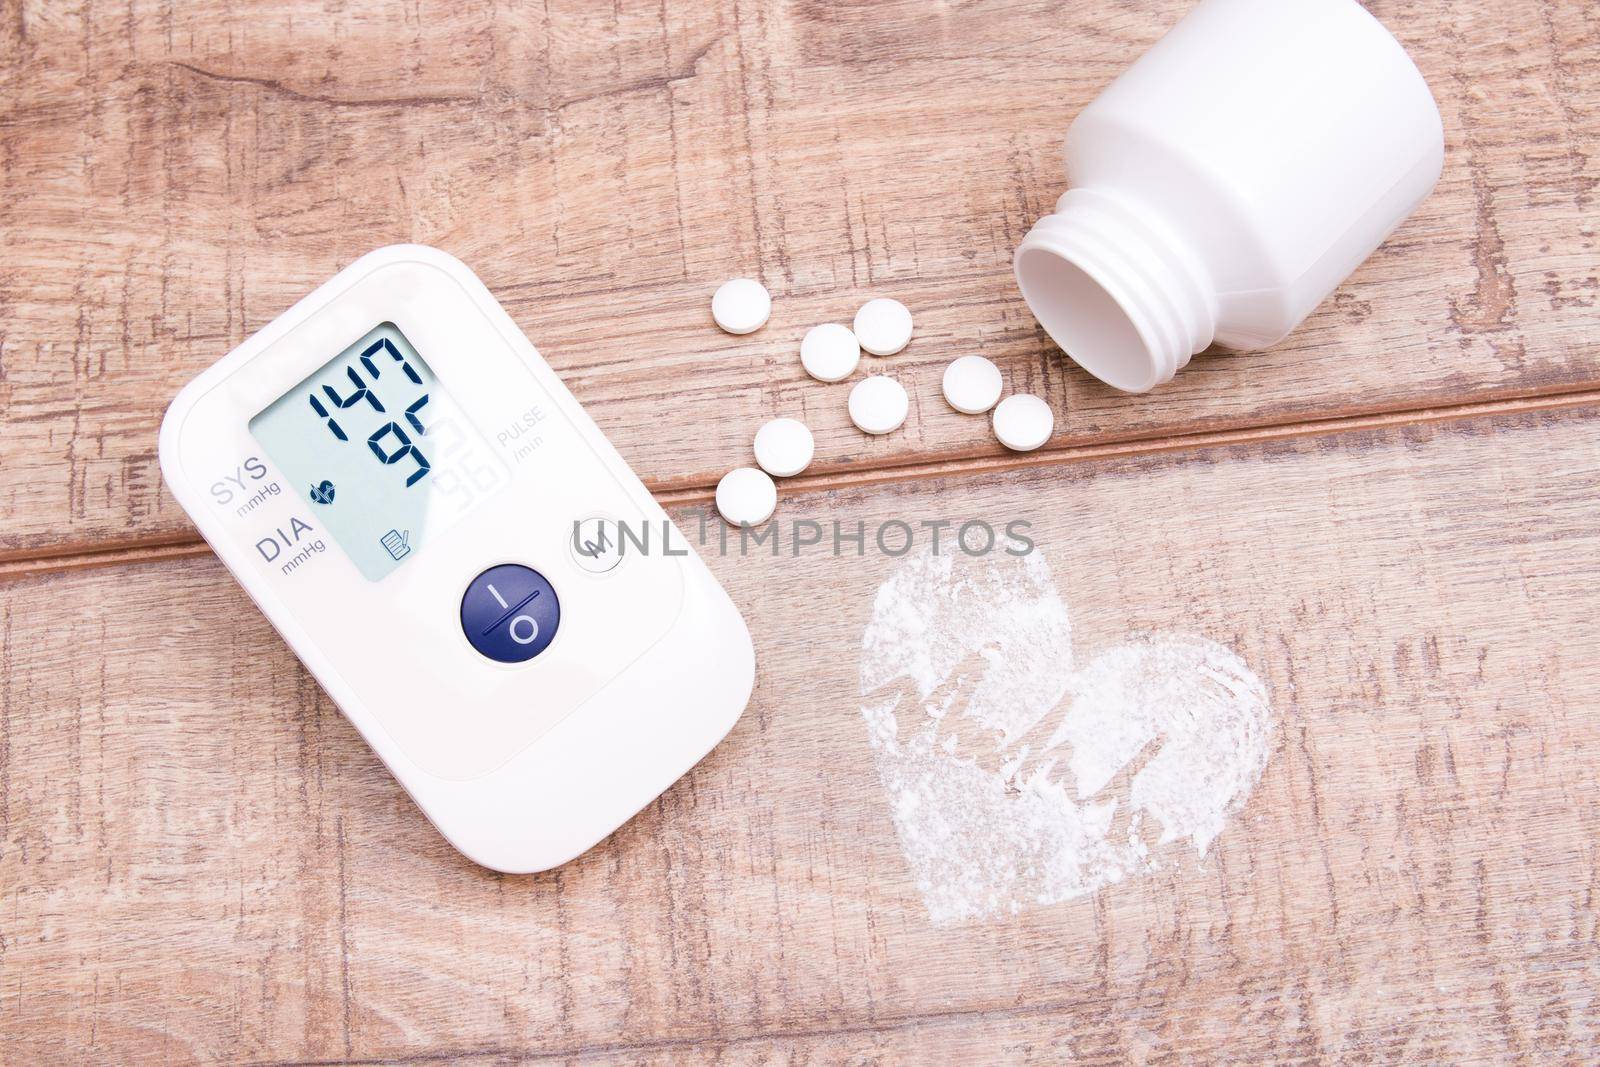 blood pressure monitor and white jar with tablets on a wooden background, heart made of white powder, pulse drawn, copy space, top view, heart pressure concept by natashko